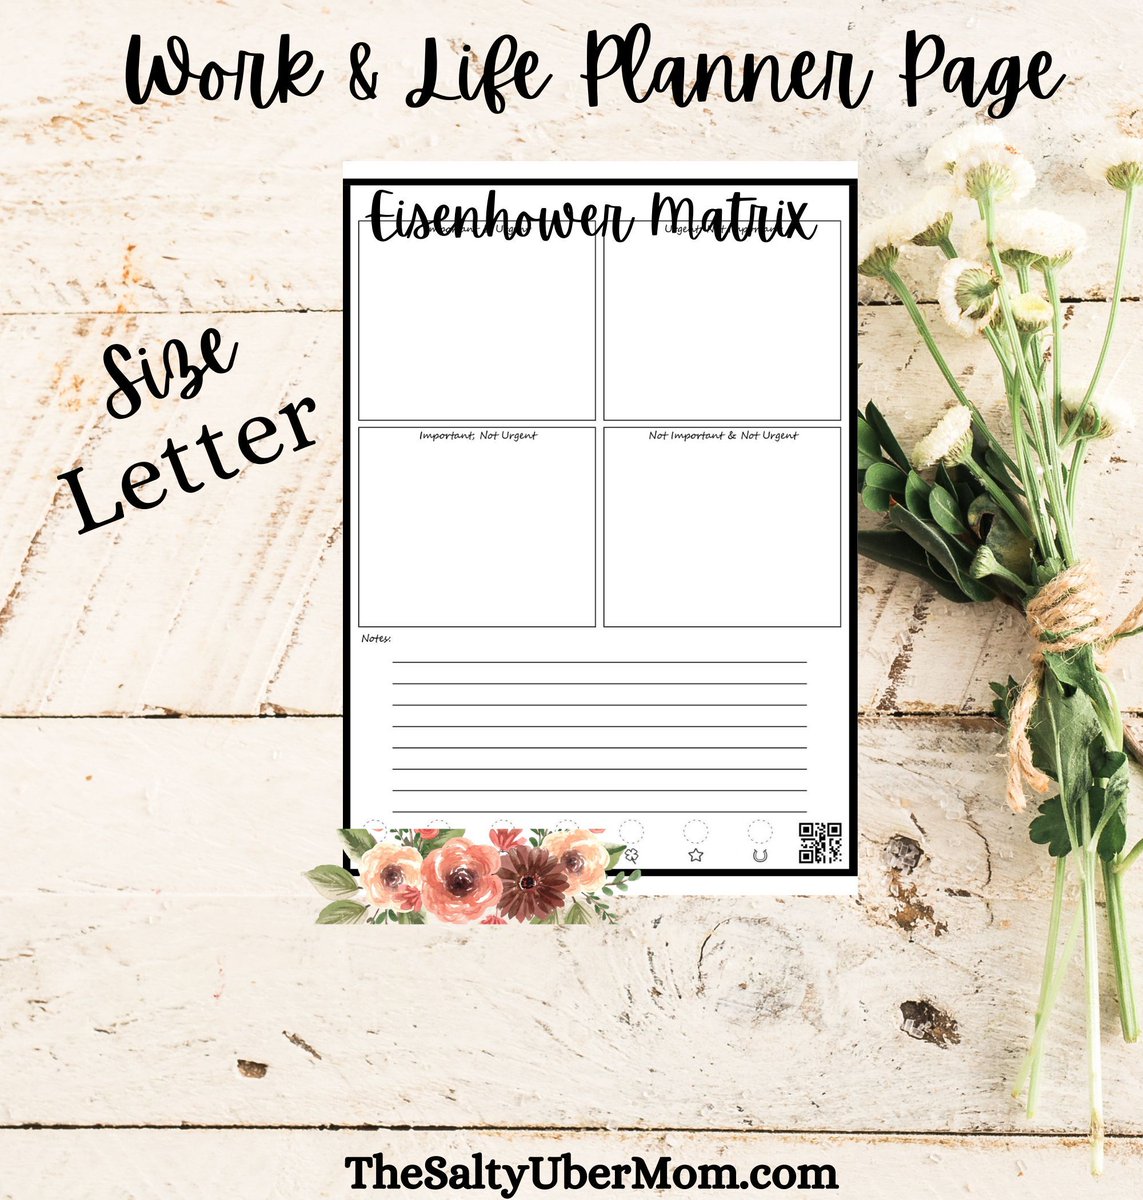 The Eisenhower Matrix digital download is an easy way to split up your tasks to quickly prioritize your tasks so you can see what to focus on first. #digitaldownload #eisenhowermatrix #journal #planner #plannerpages #customplanner buff.ly/3VoJvRt